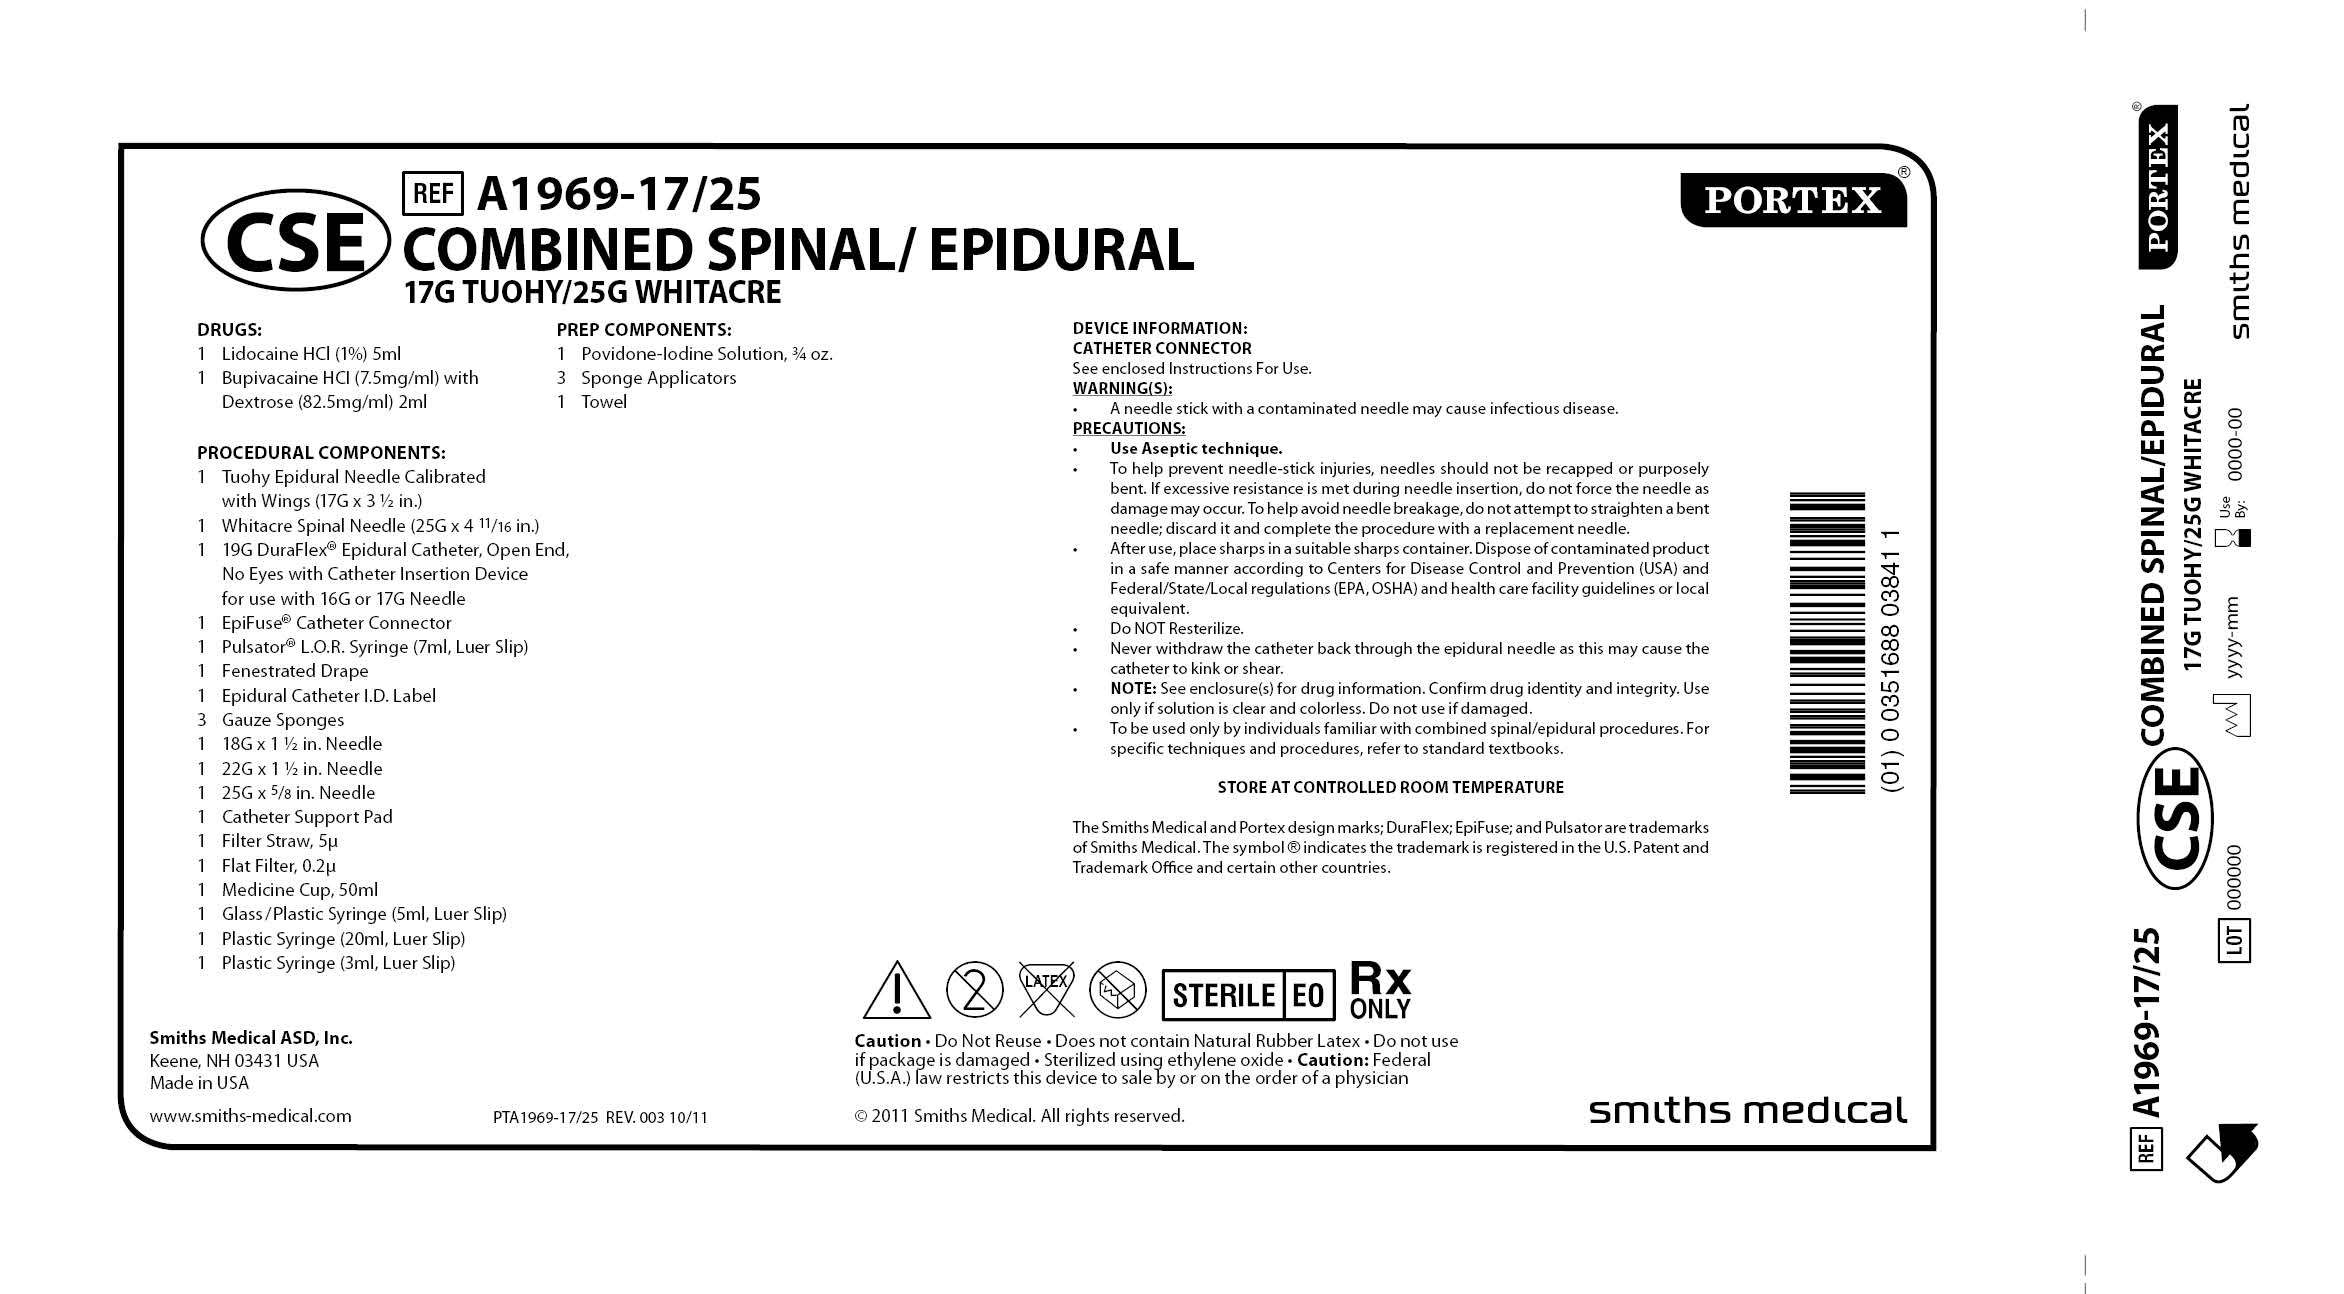 A1969-17/25 COMBINED SPINAL/EPIDURAL 17G TUOHY/25G WHITACRE